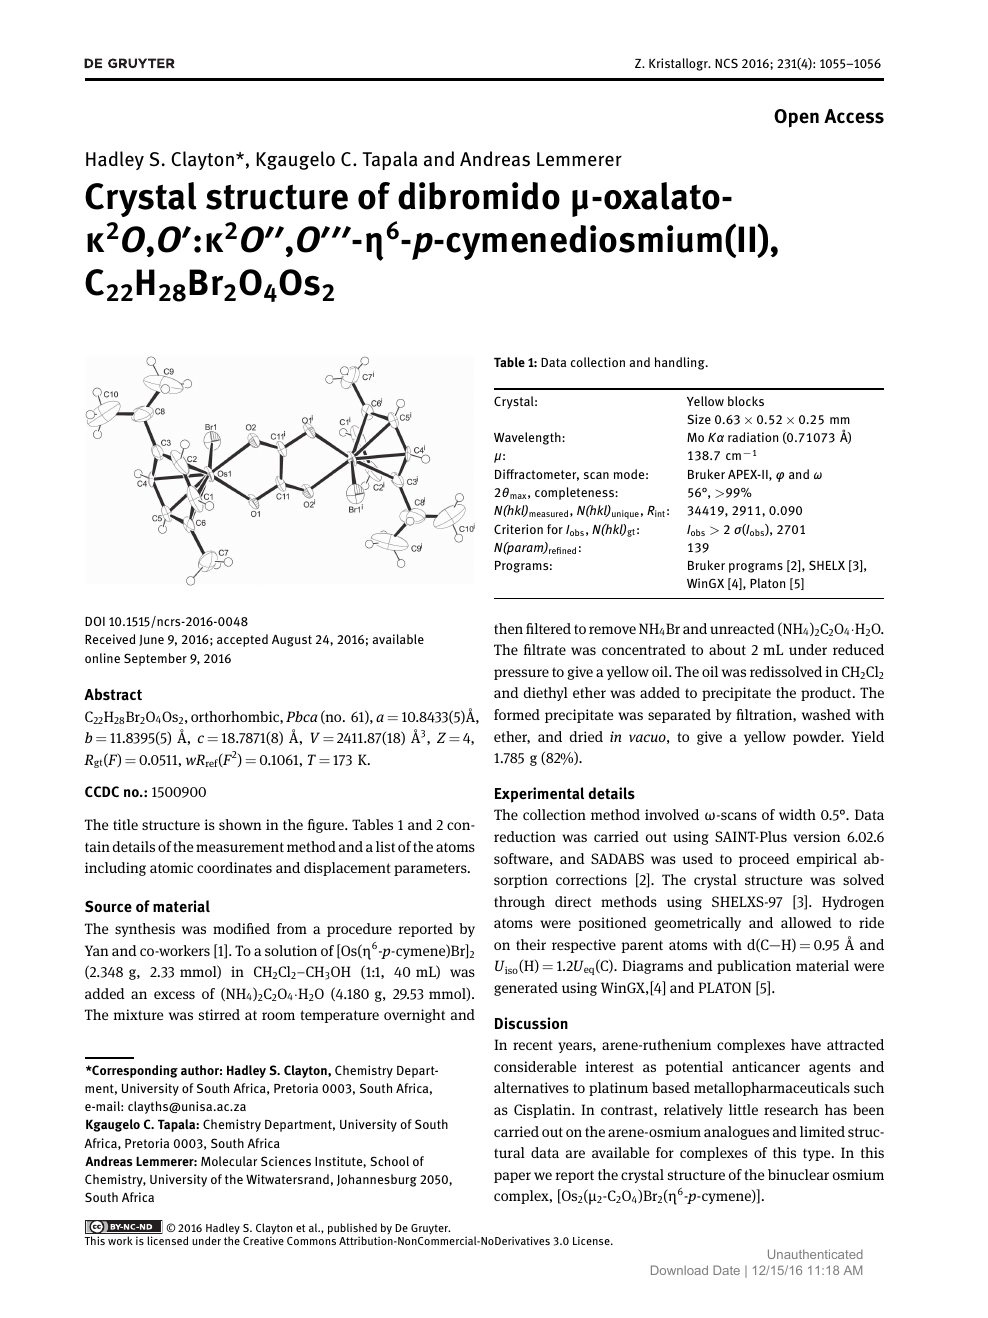 Crystal Structure Of Dibromido M Oxalato K2o O K2o O H6 P Cymenediosmium Ii C22h28br2o4os2 Topic Of Research Paper In Biological Sciences Download Scholarly Article Pdf And Read For Free On Cyberleninka Open Science Hub